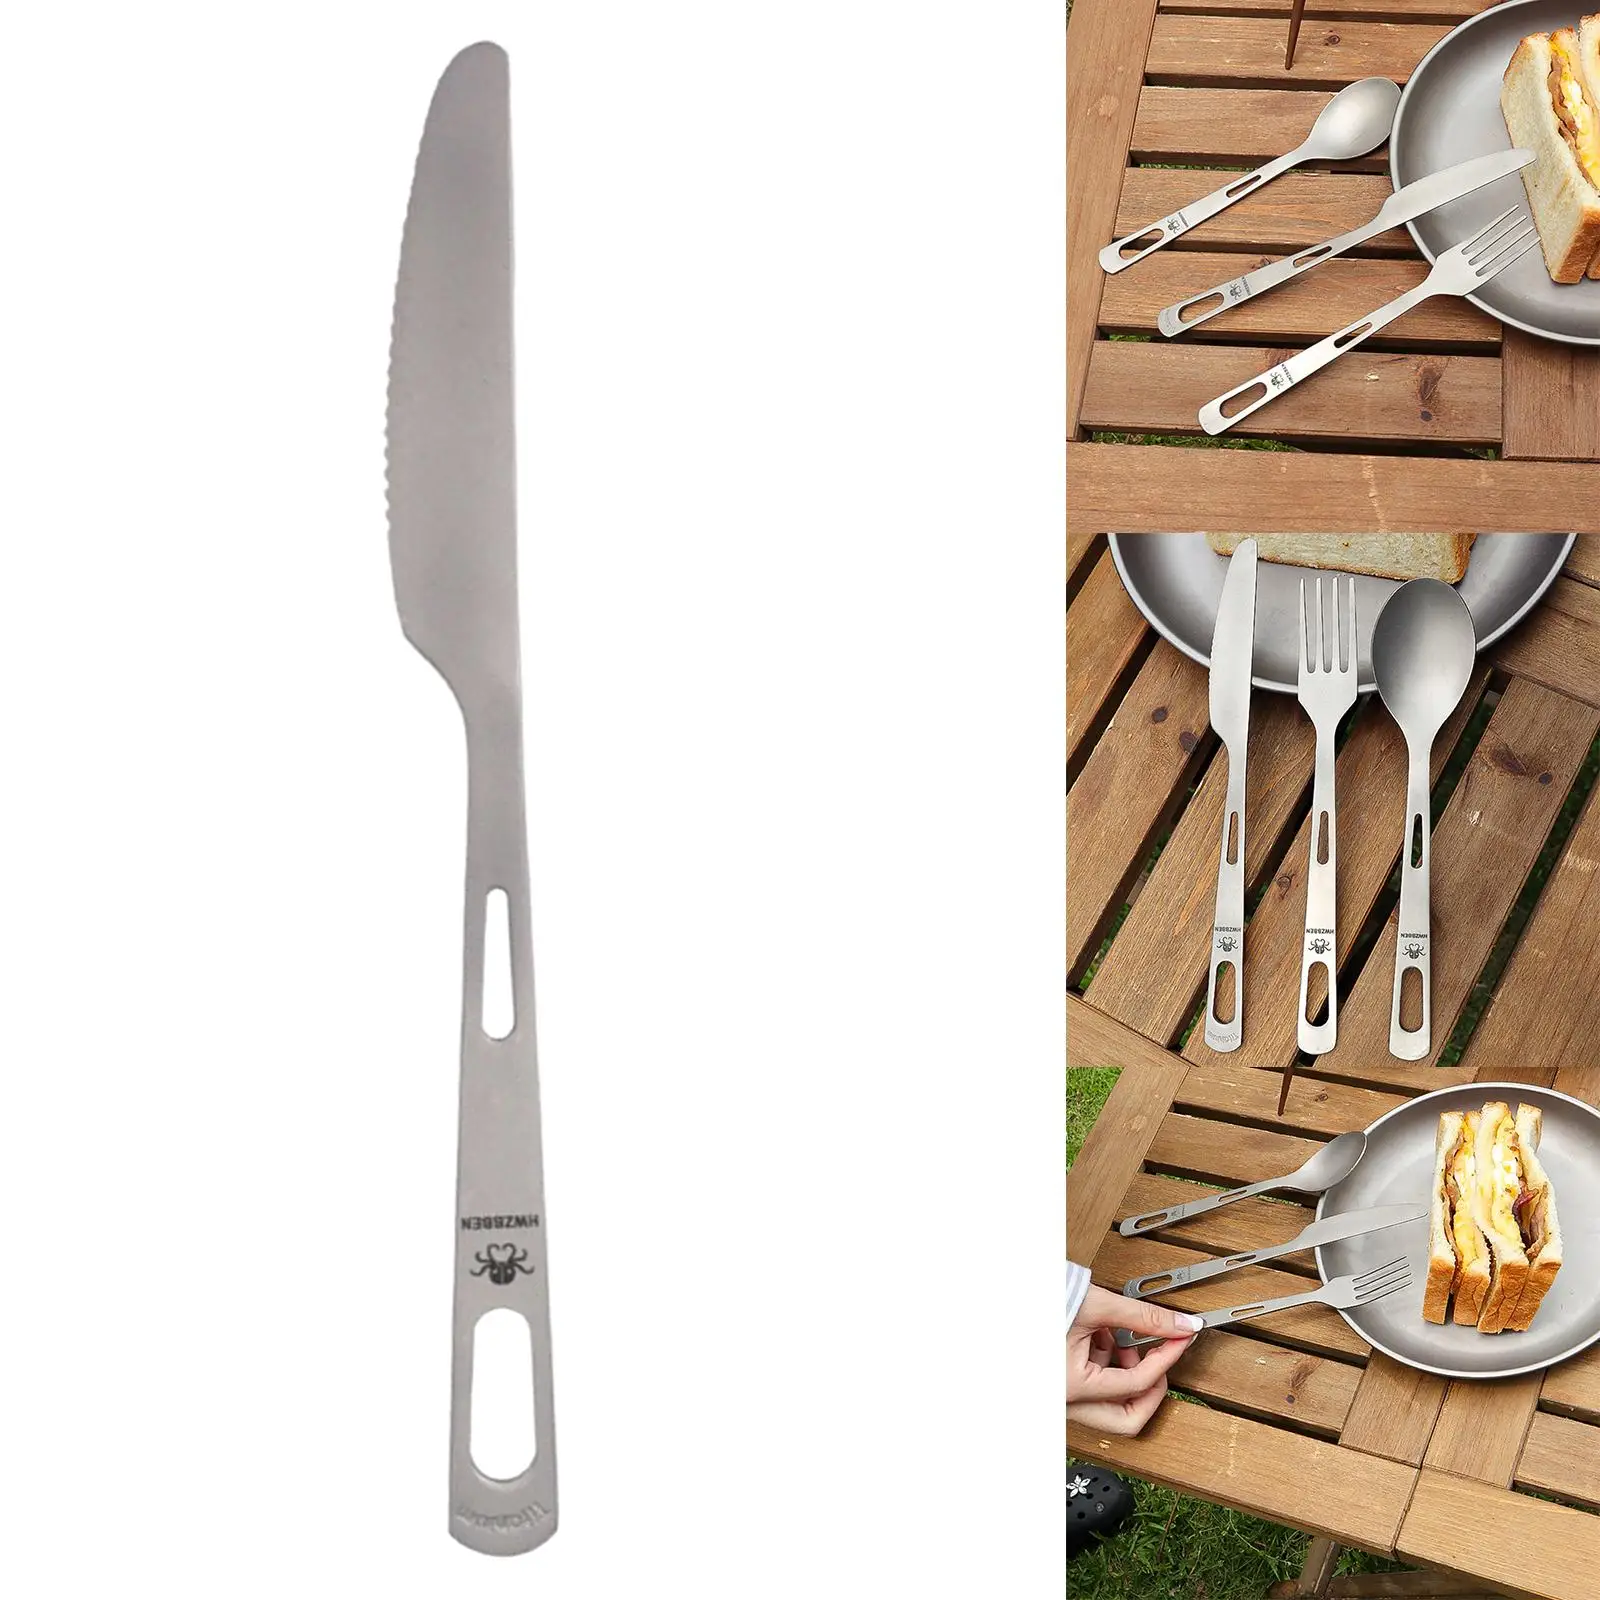 Portable Titanium Knife Tableware Utensil Flatware Rustproof Outdoor Cutlery Knives for Camping Hiking Home School Travel